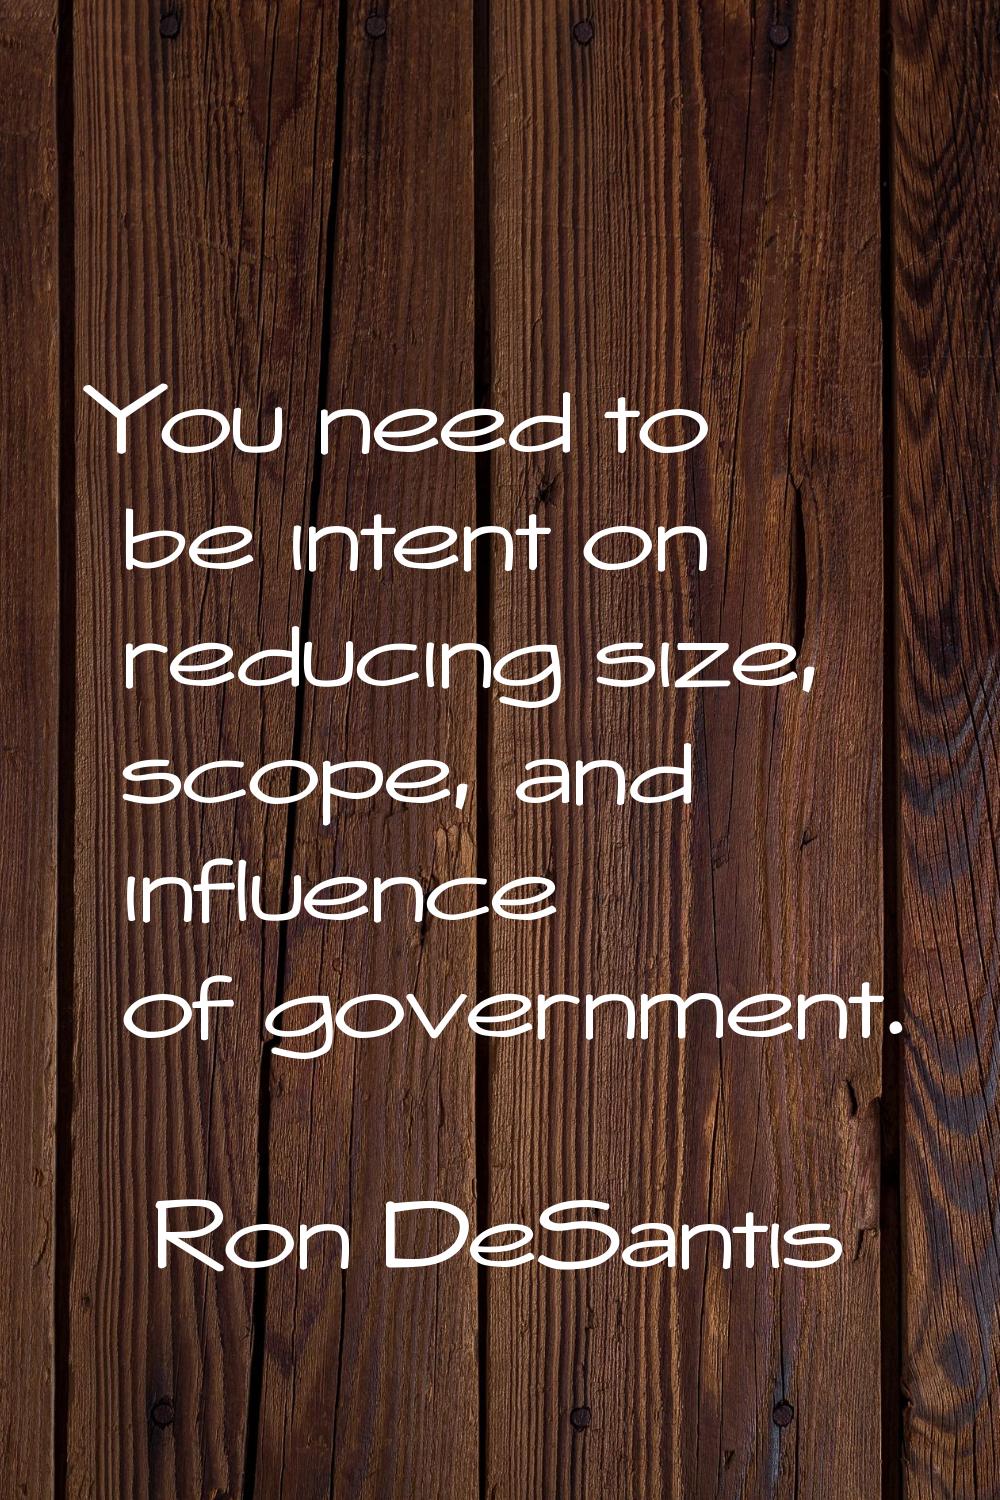 You need to be intent on reducing size, scope, and influence of government.